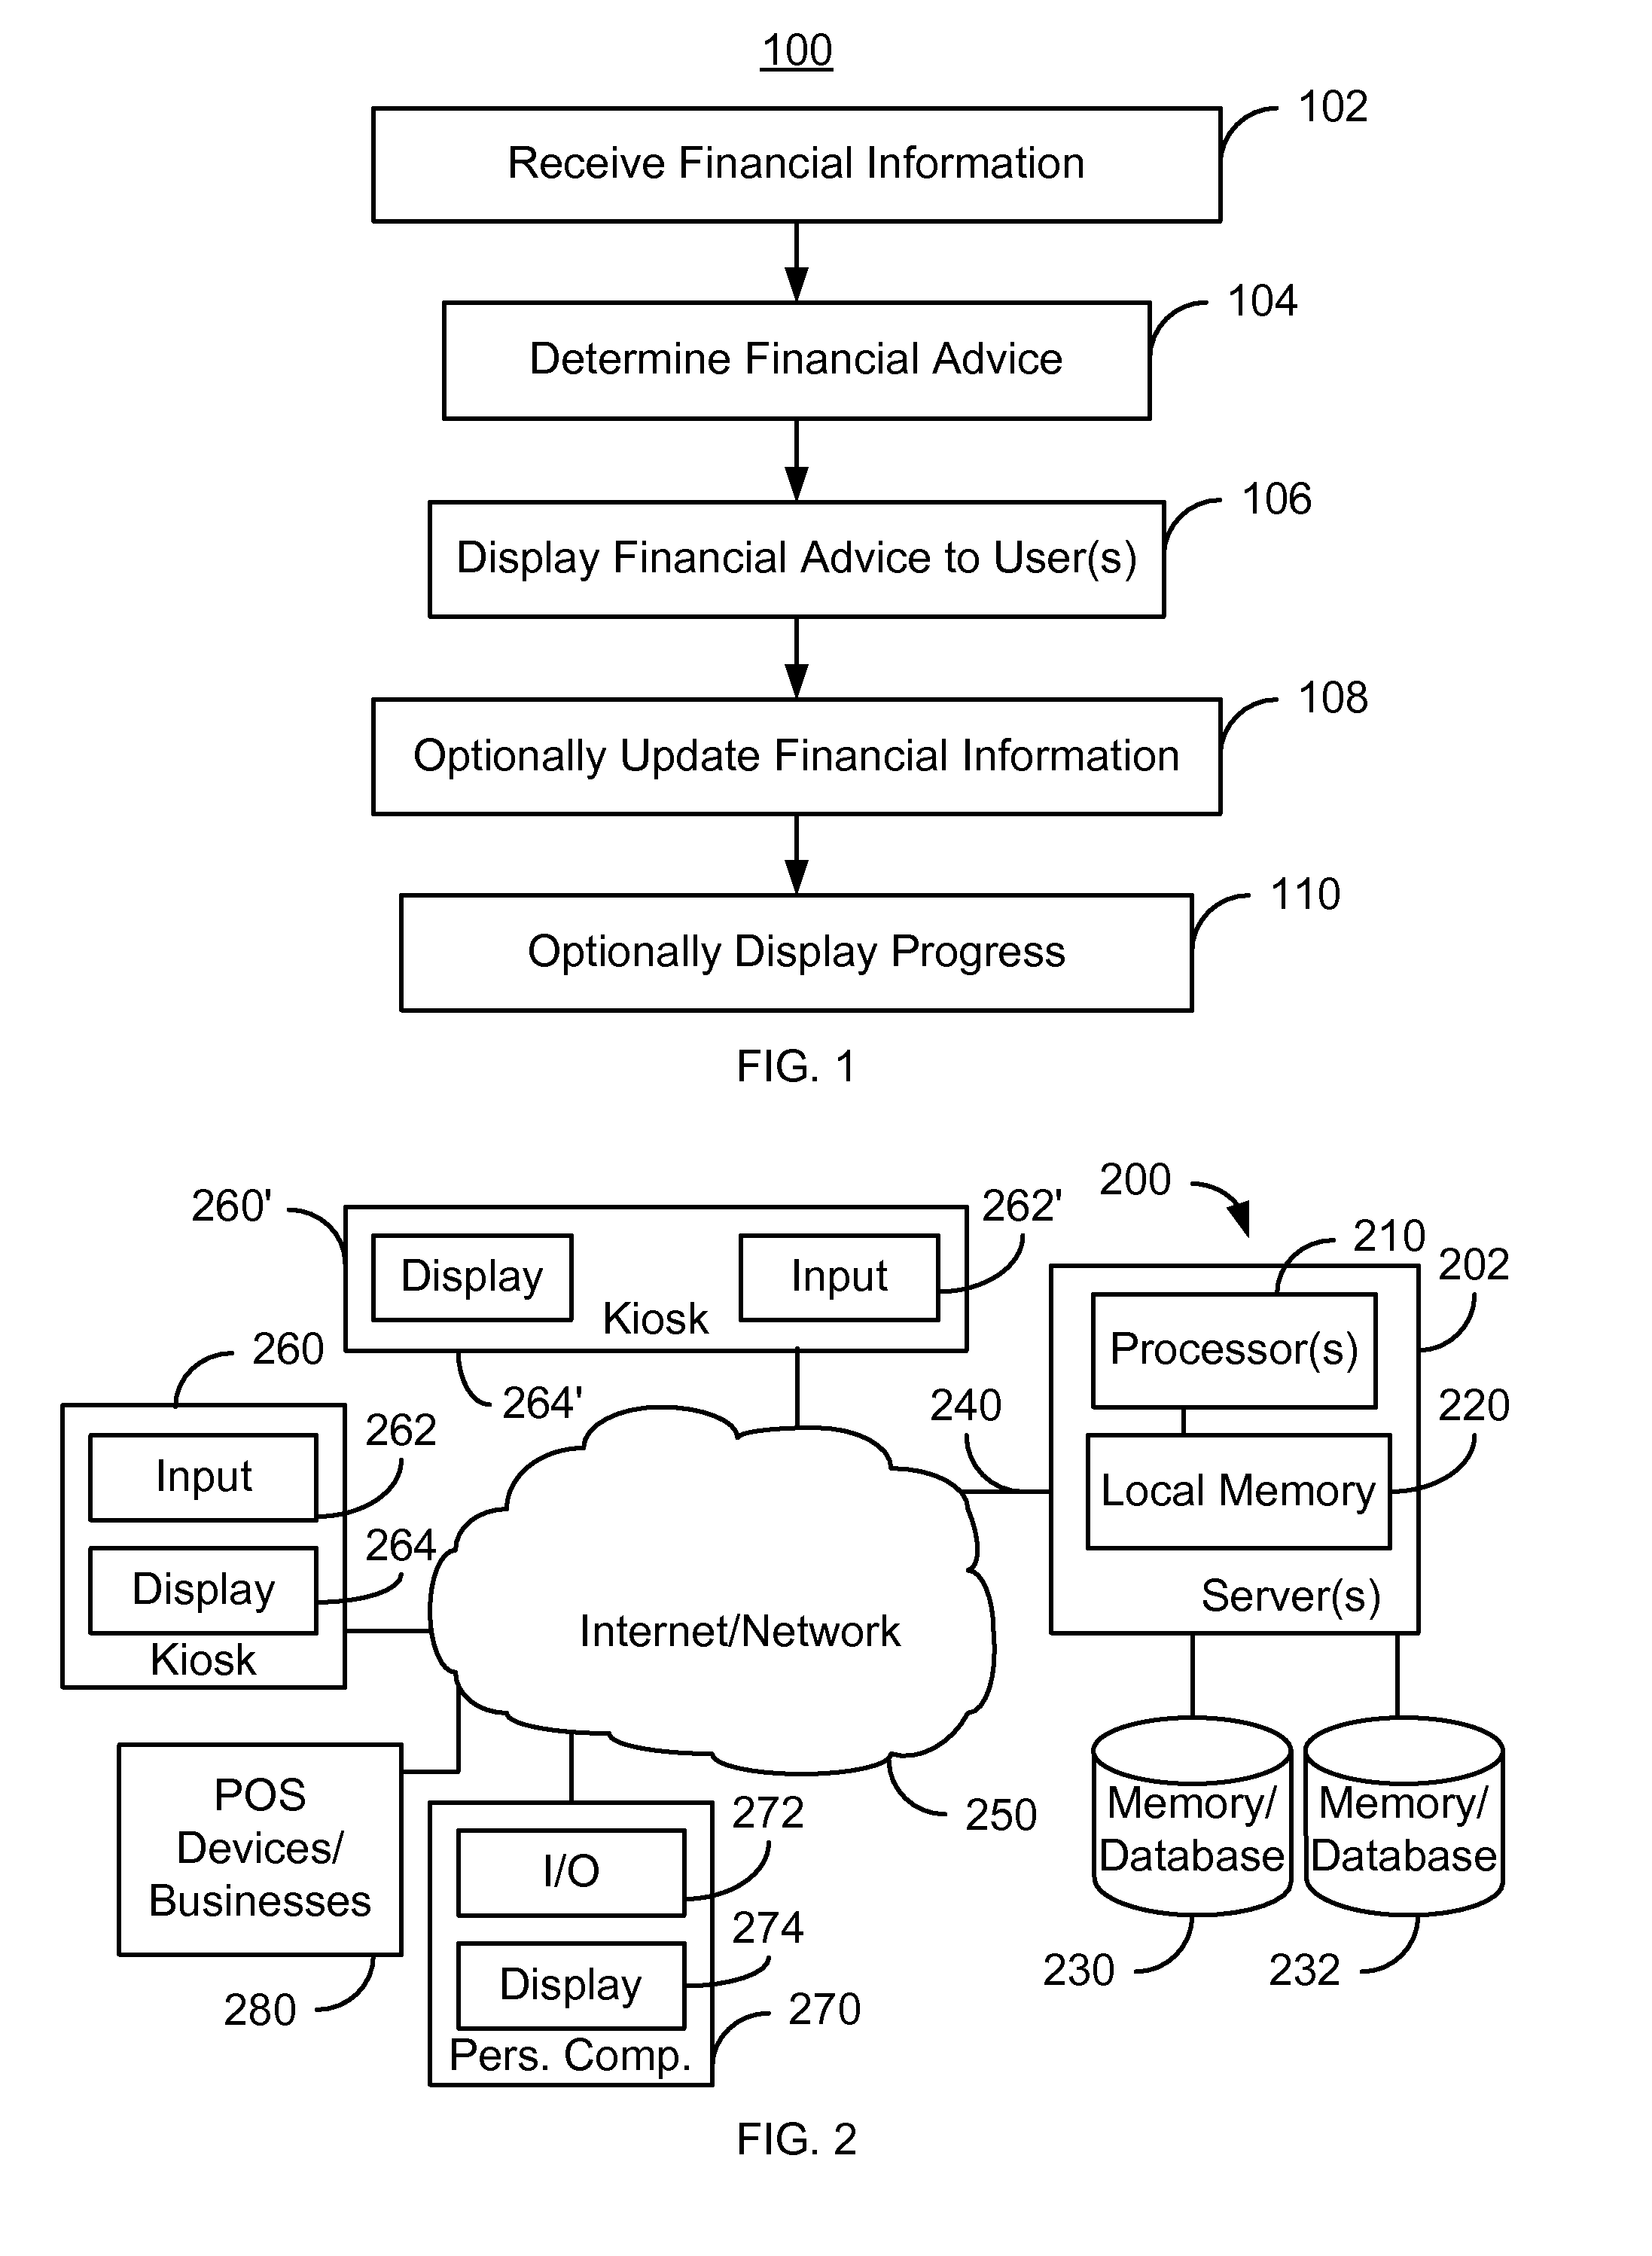 Method and system for providing financial services